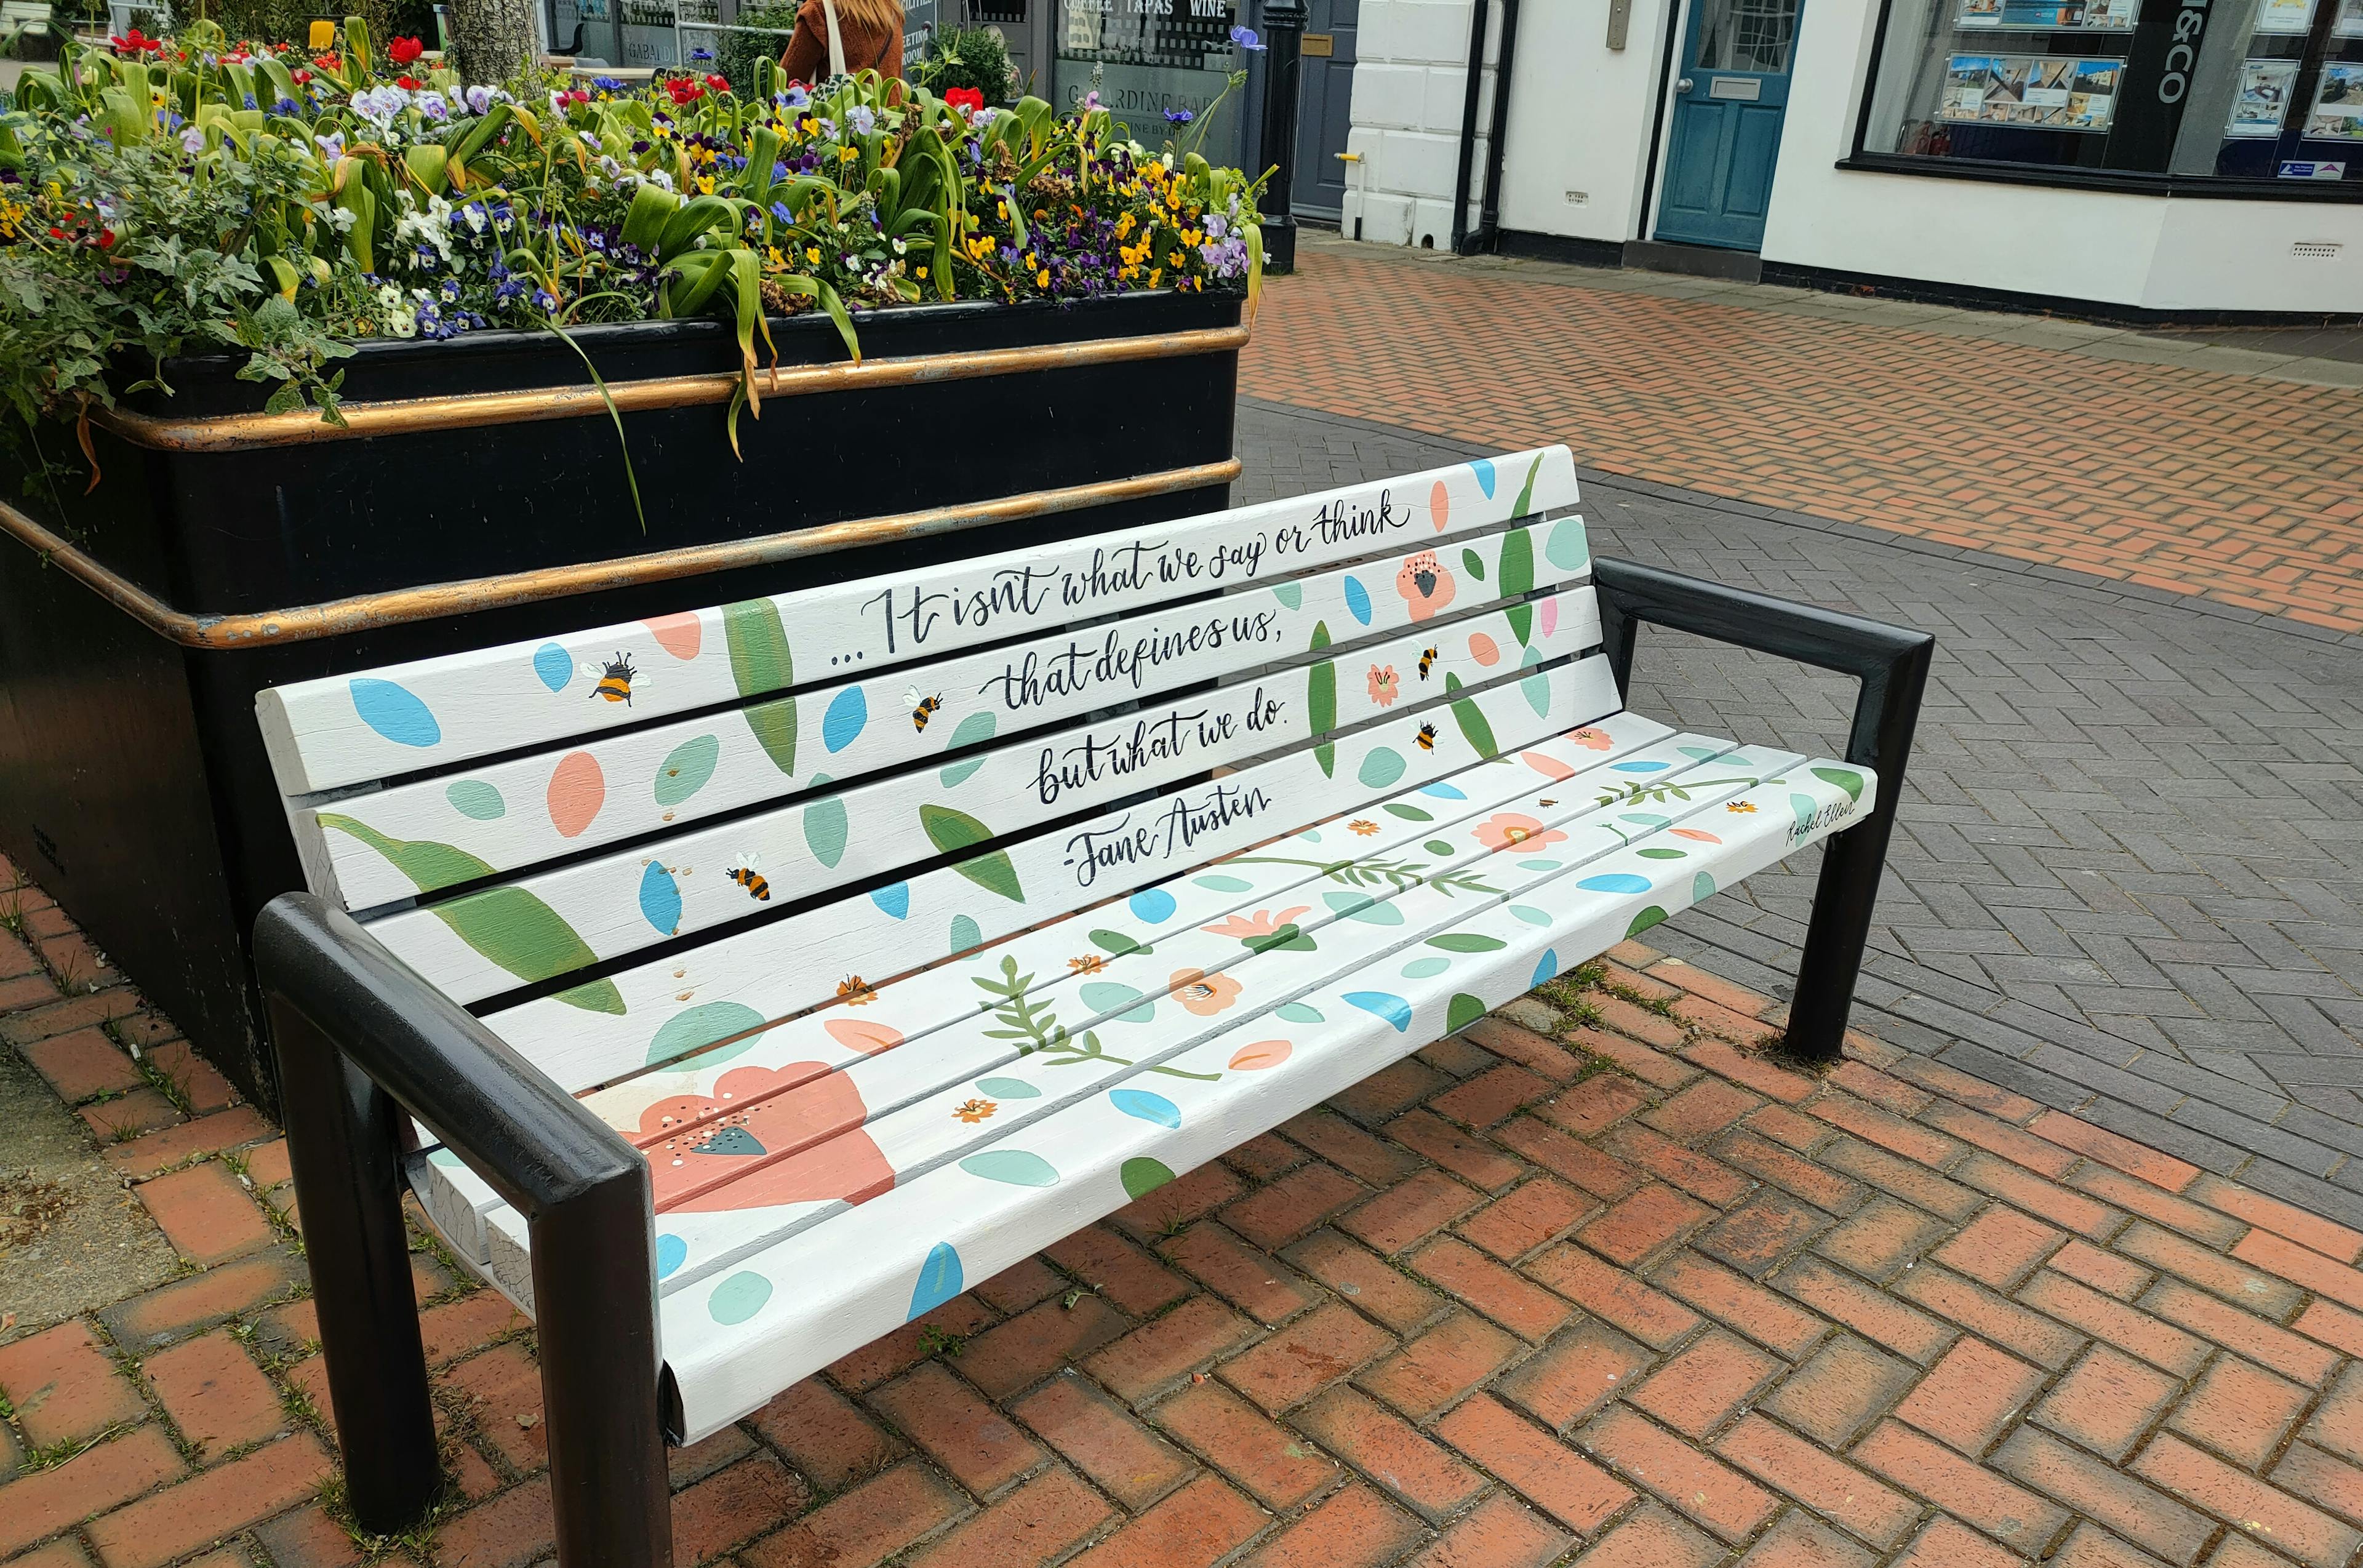 A bench with black arms is painted white with a quote by Jane Austin. It is decorated with leaves and flowers.